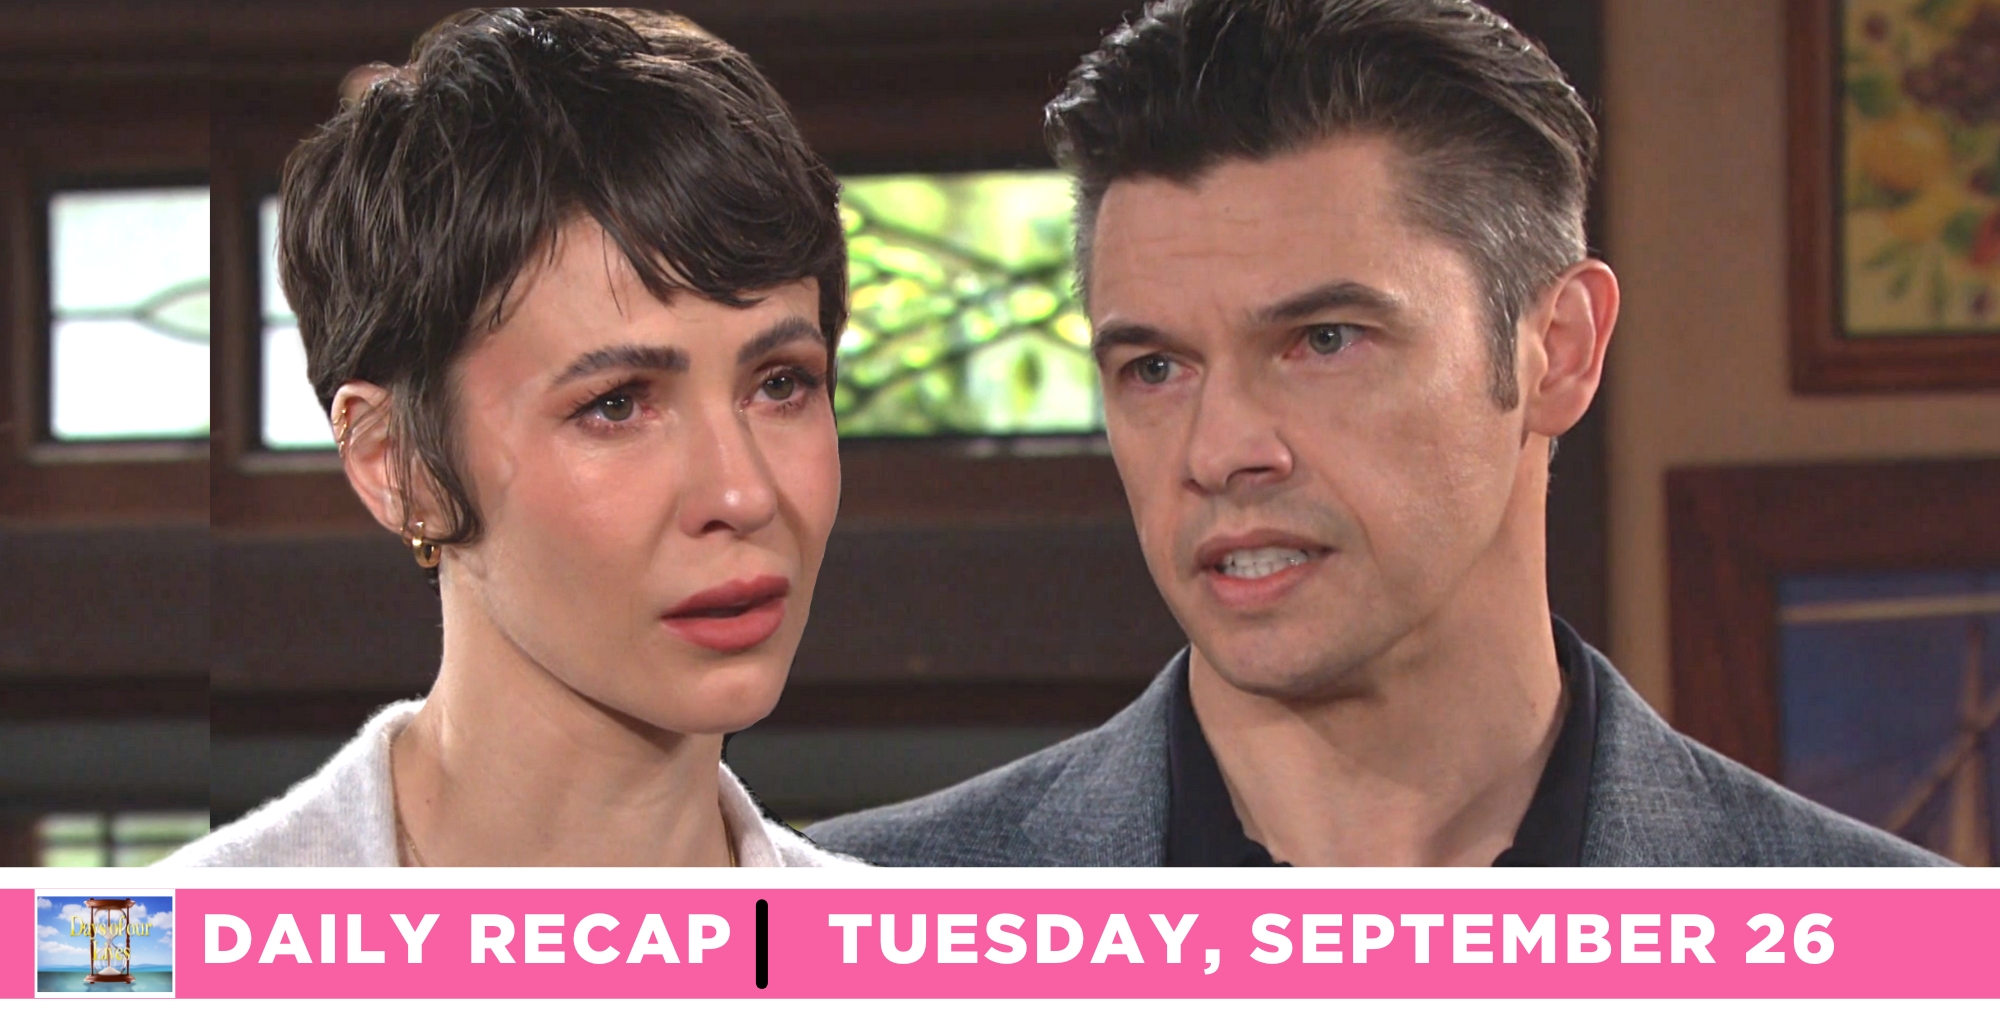 xander cook confronted sarah horton on days of our lives recap for tuesday, september 26, 2023.